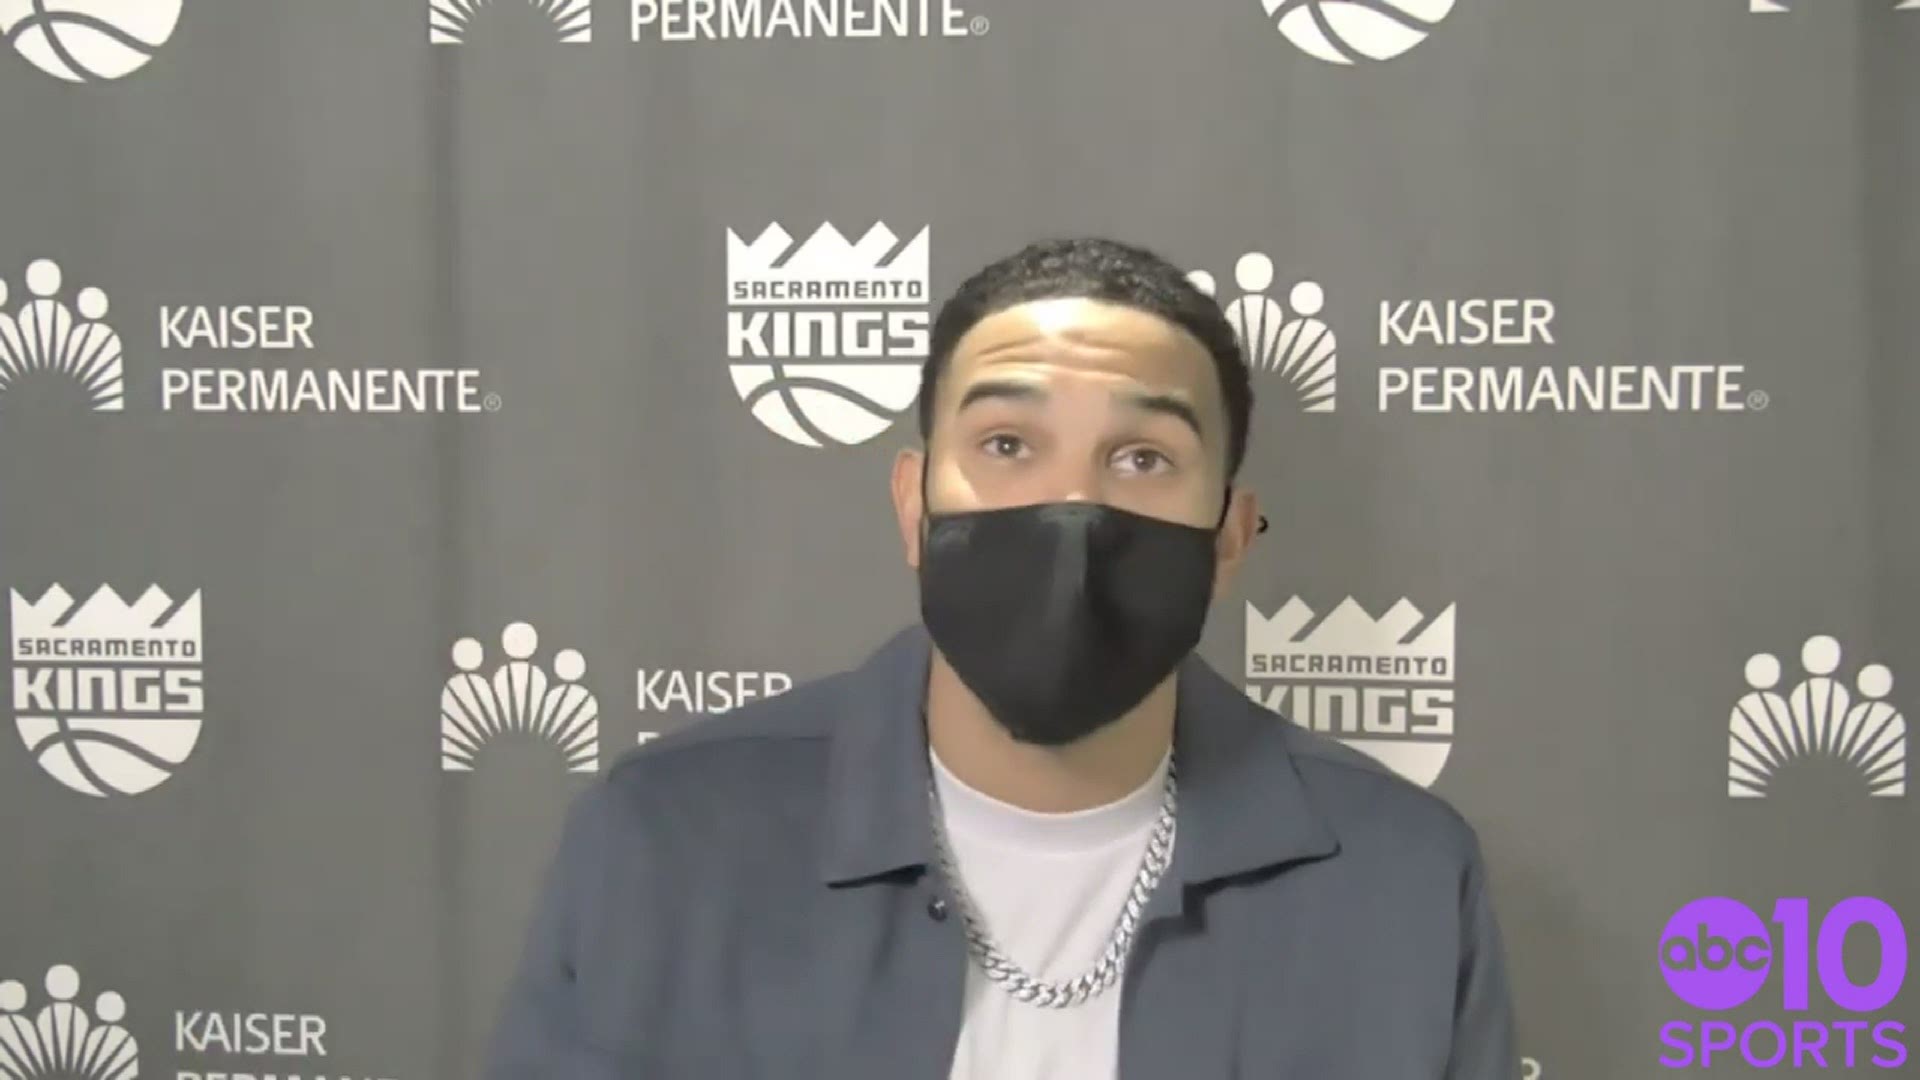 Kings PG Cory Joseph discusses Sacramento’s 126-124 victory over the Toronto Raptors in Tampa on Friday night and notching his season scoring high with 16 points.